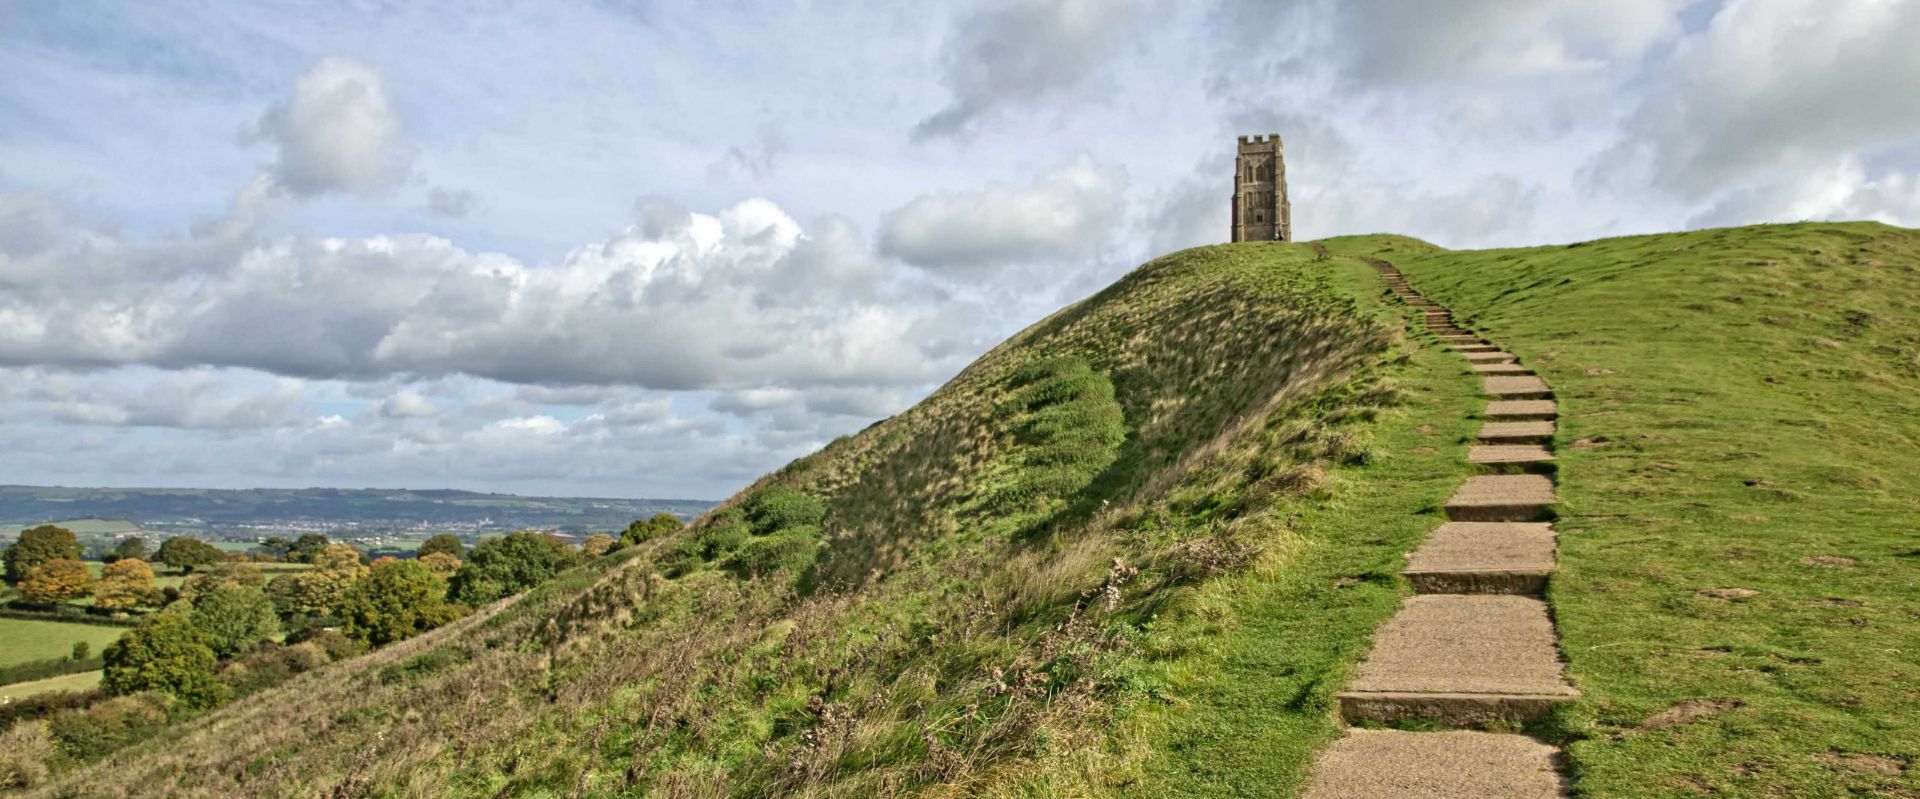 The footpath leading to the top of Glastonbury Tor